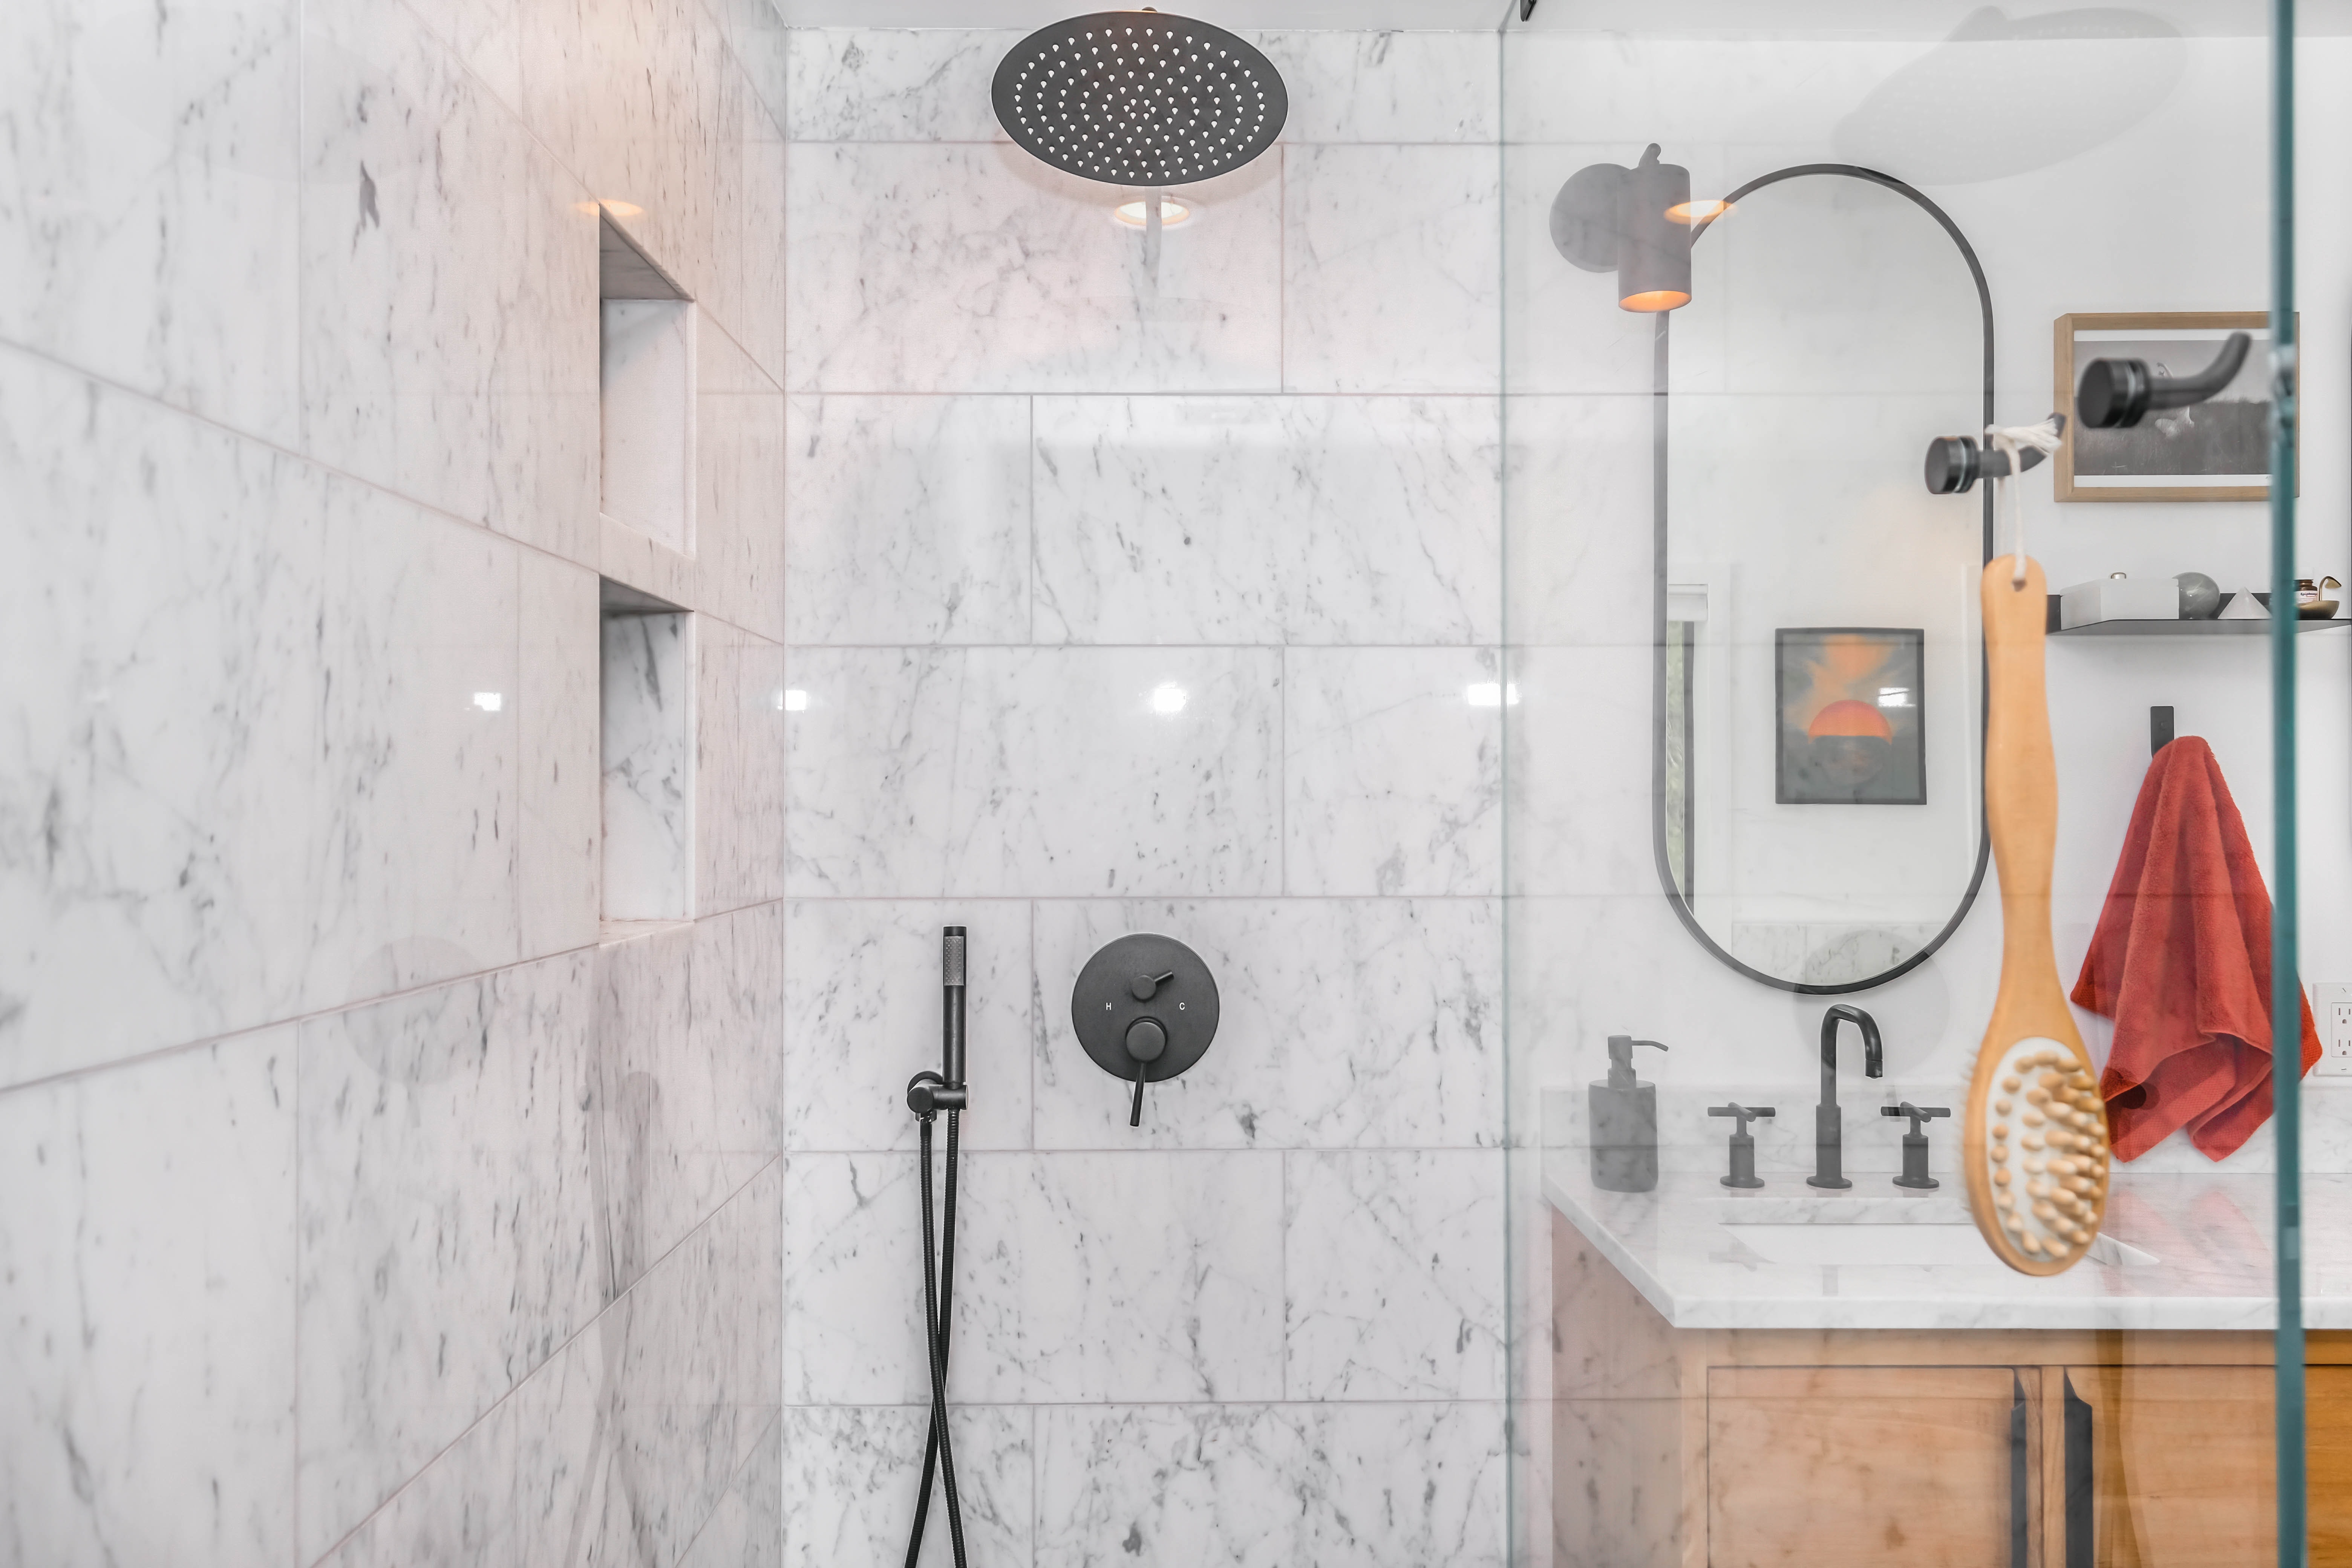 How to Choose a Good Shower Head